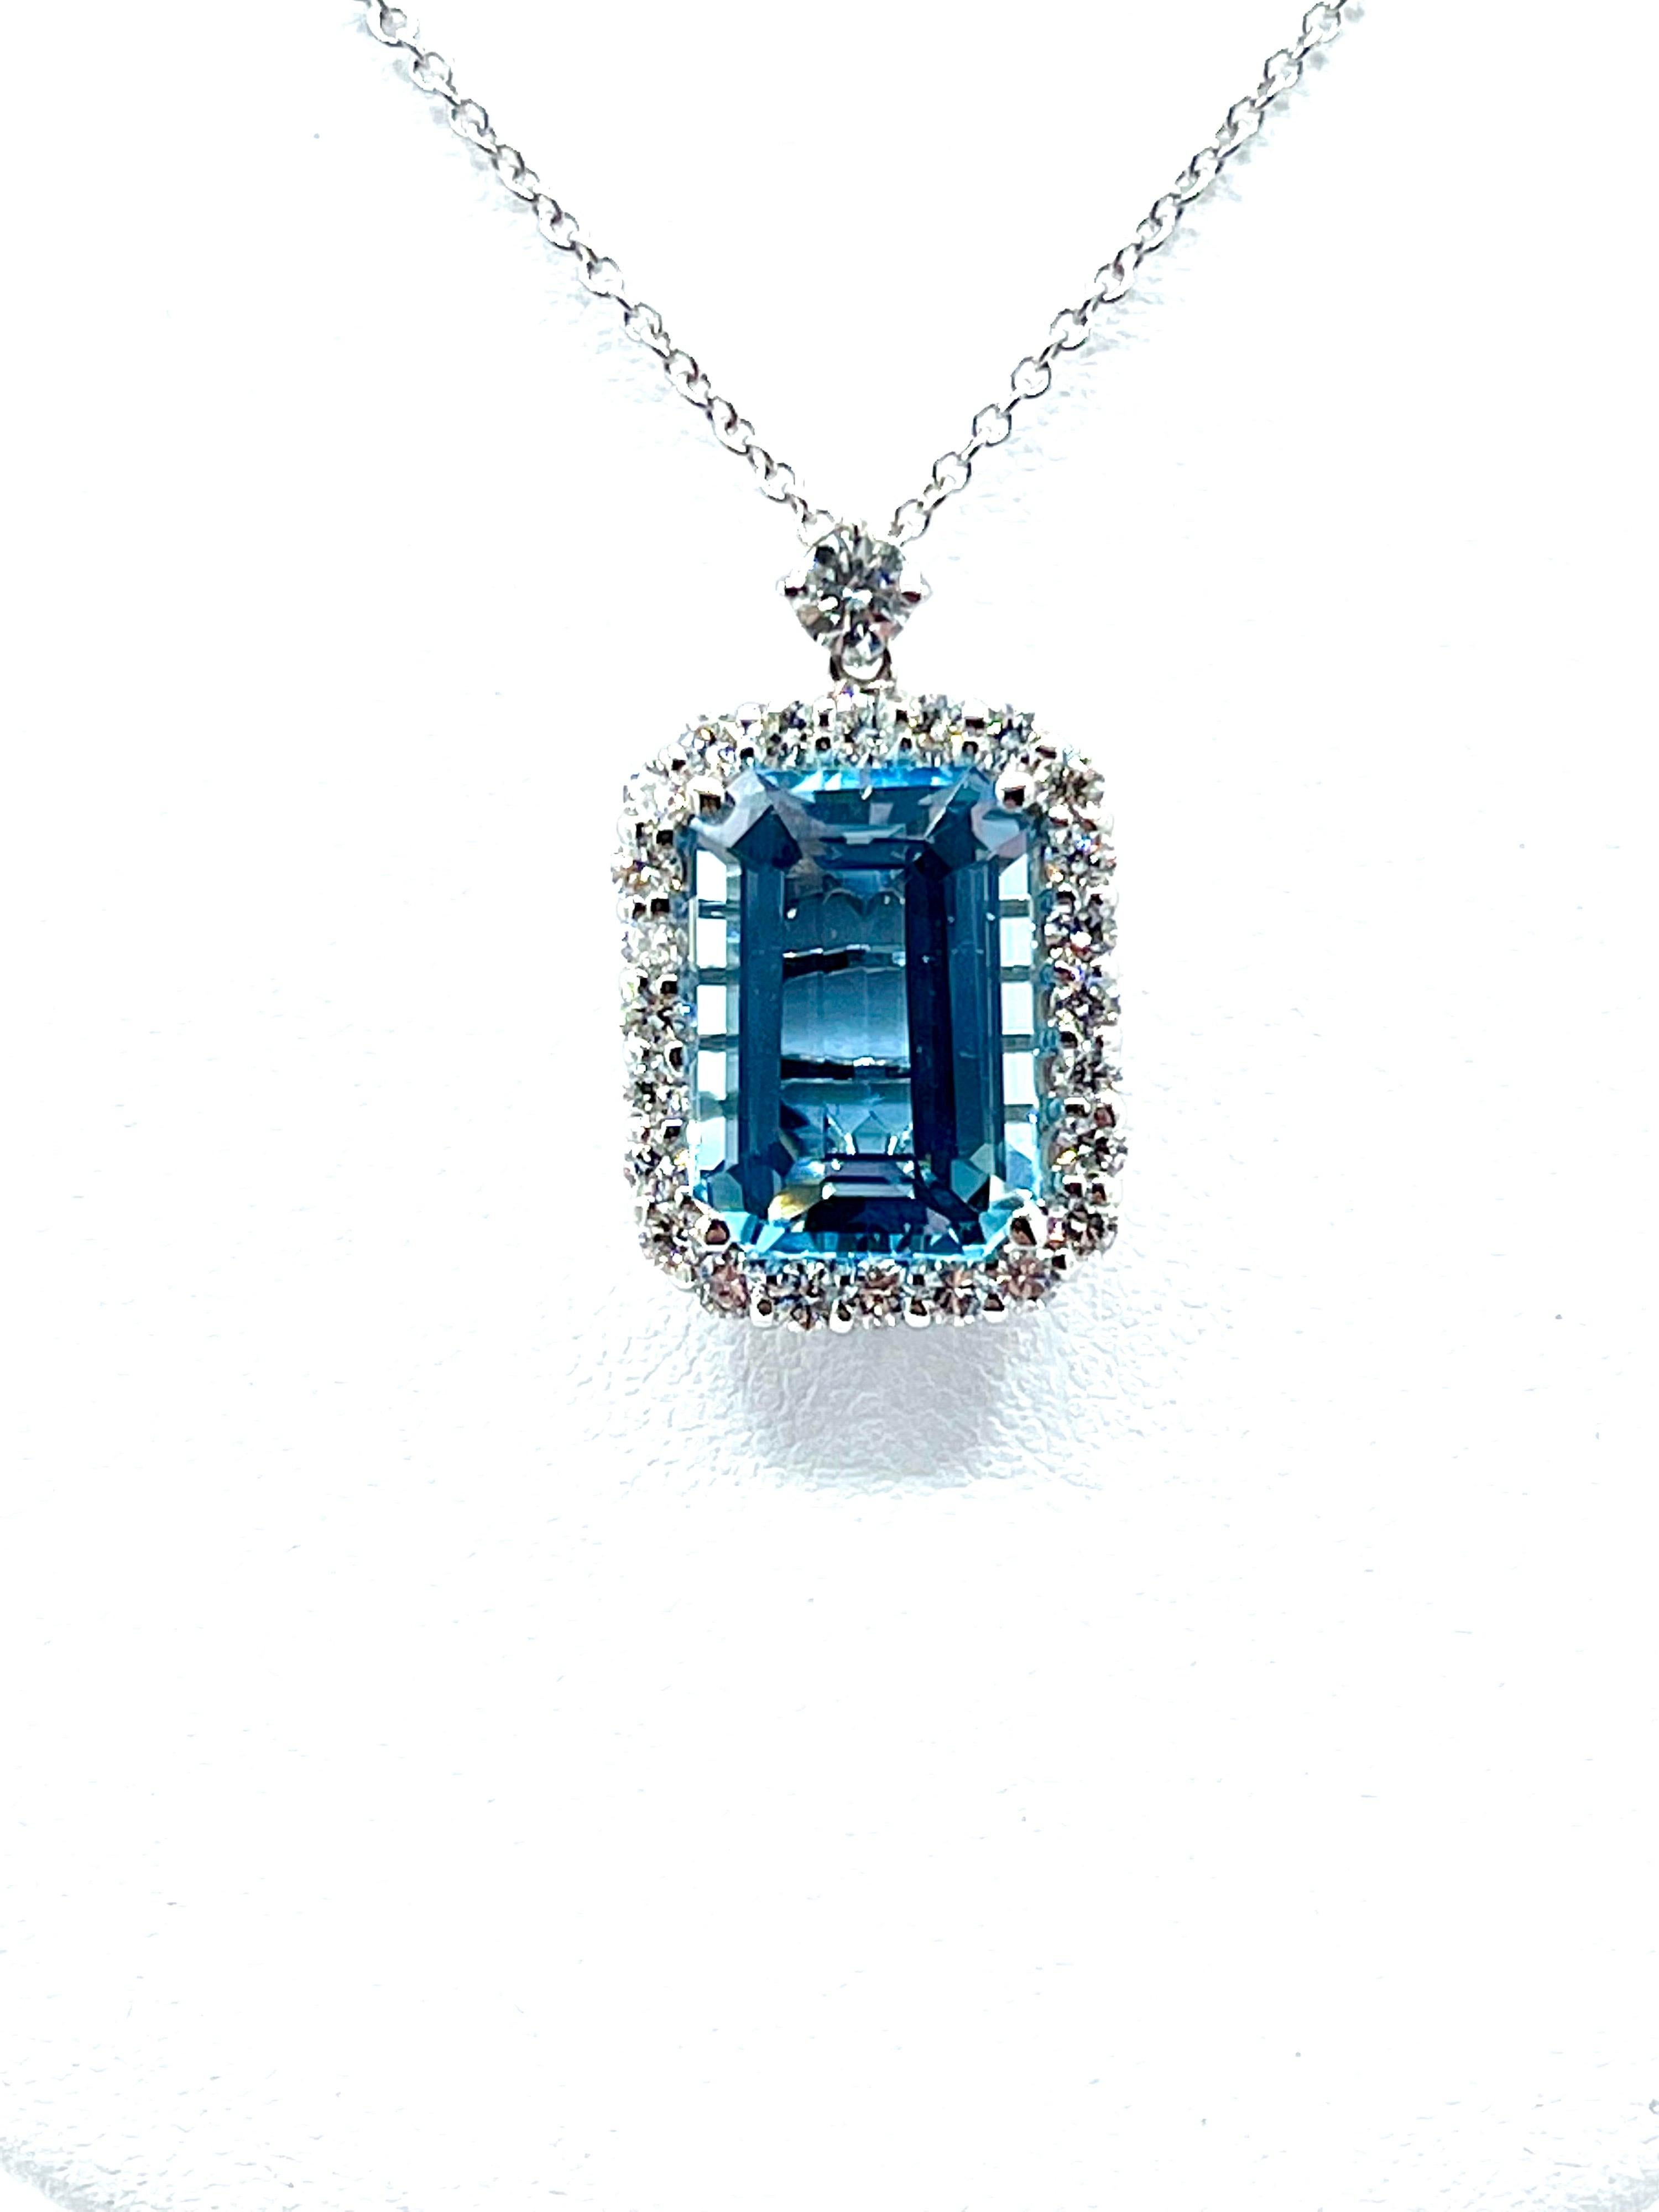 A gorgeous 6.25 carat emerald cut Aquamarine necklace.  The Aquamarine has a stunning brilliance and color.  it is set in four prongs, with a single row of round brilliant Diamonds surrounding, and one Diamond on top as part of the bale.  There is a